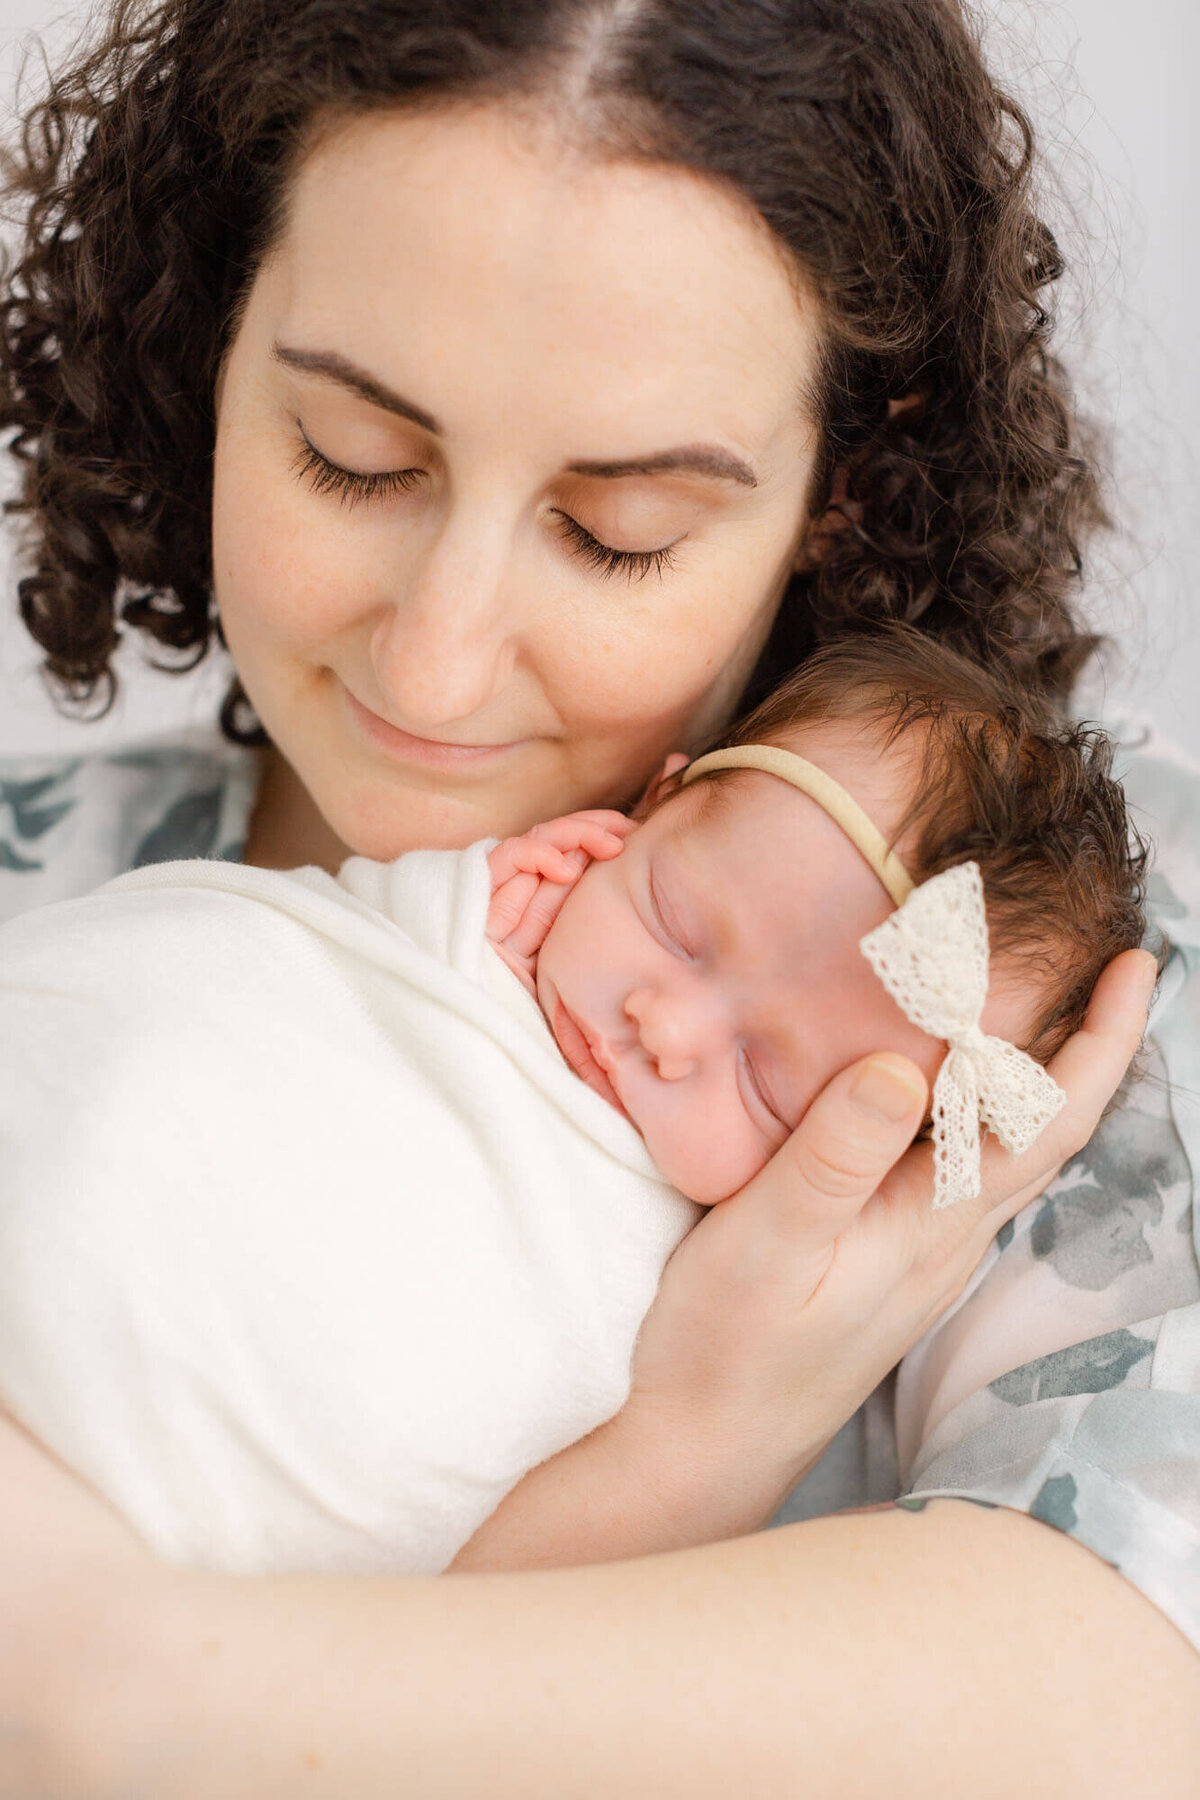 New mom with dark curly hair holding her baby up to her cheek. Mom has eyes closed and a small grin on her face. Baby is sleeping peacefully and wrapped up in a white blanket with her little hands out together resting on her cheek.